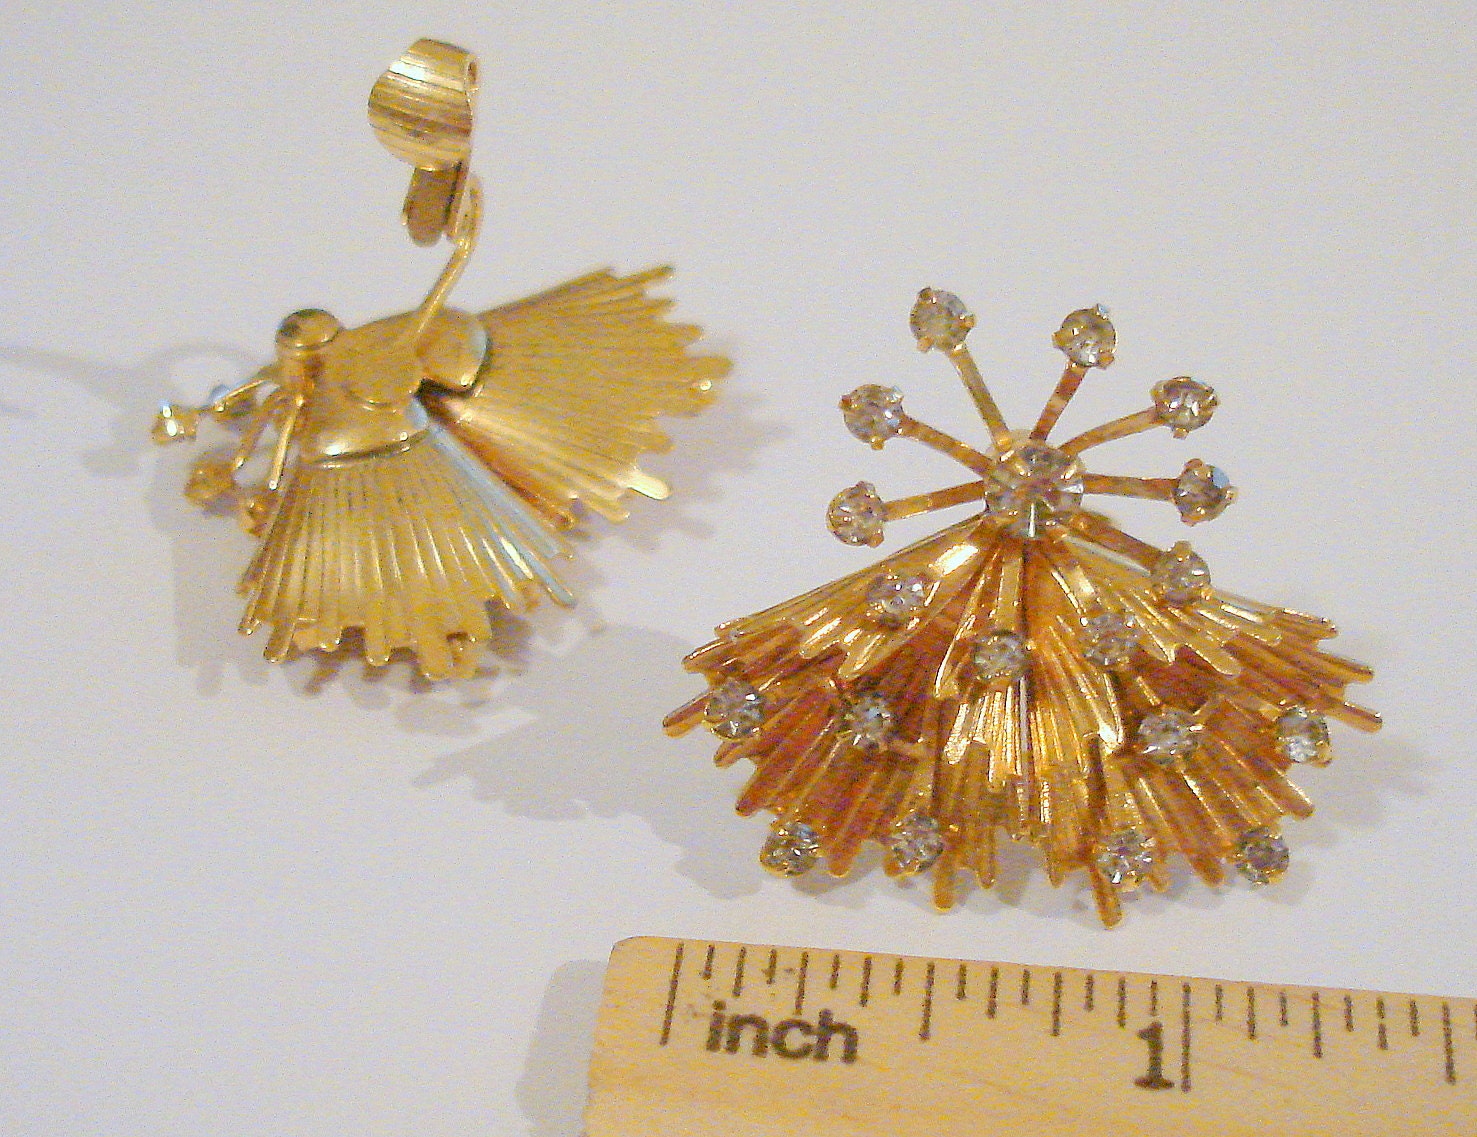 Vintage Emmons Starburst Pin & Clip Earrings Jewelry Set with Rhinestone Accents